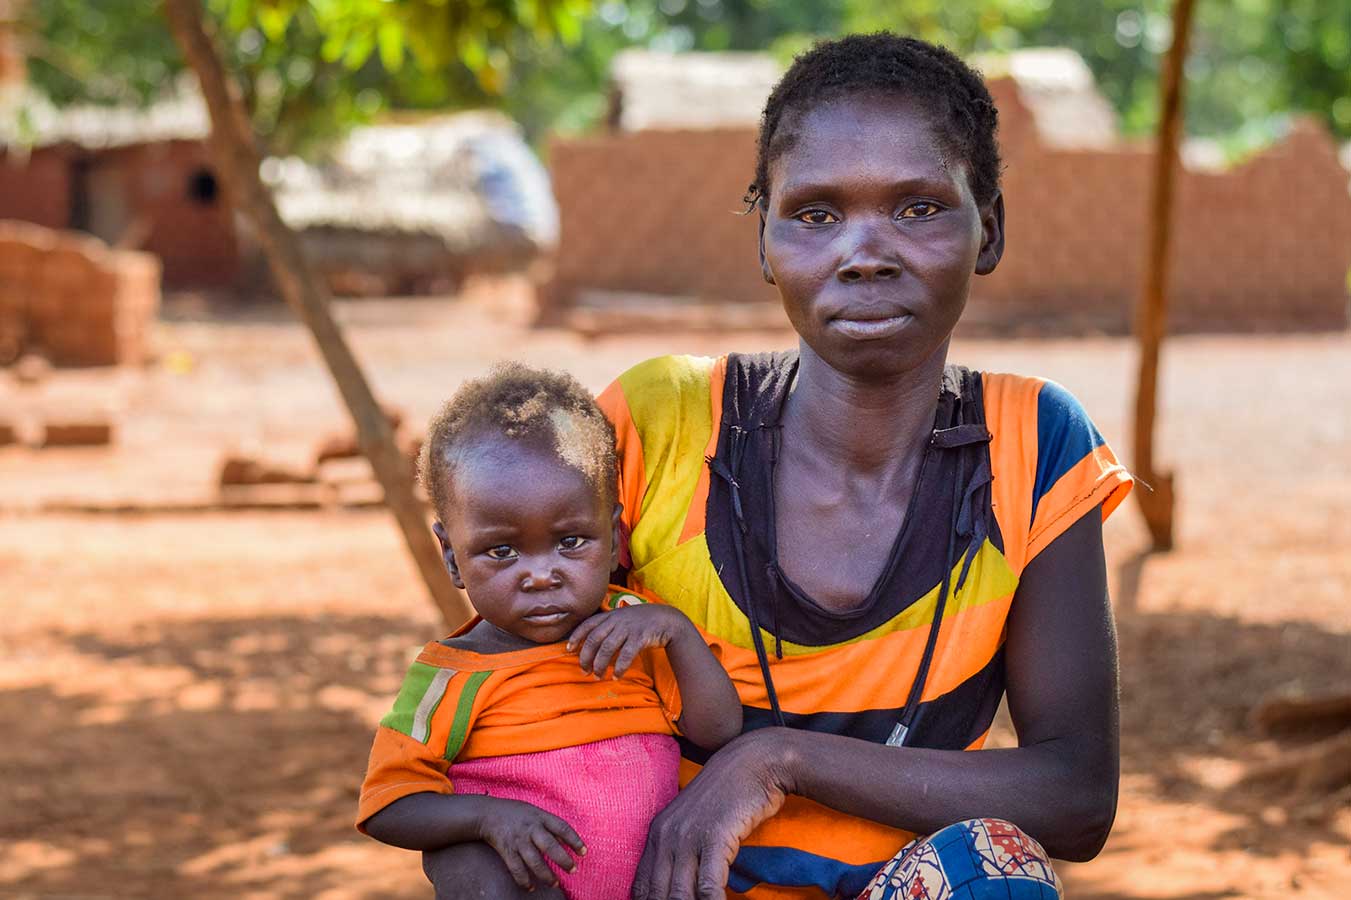 In the Ombella-M’Poko region of Central African Republic, which has gone through more than a year of civil war, Concern's nutrition teams work with pregnant and breastfeeding women, as well as their young children, to ensure that they have the support and nutrition they need.